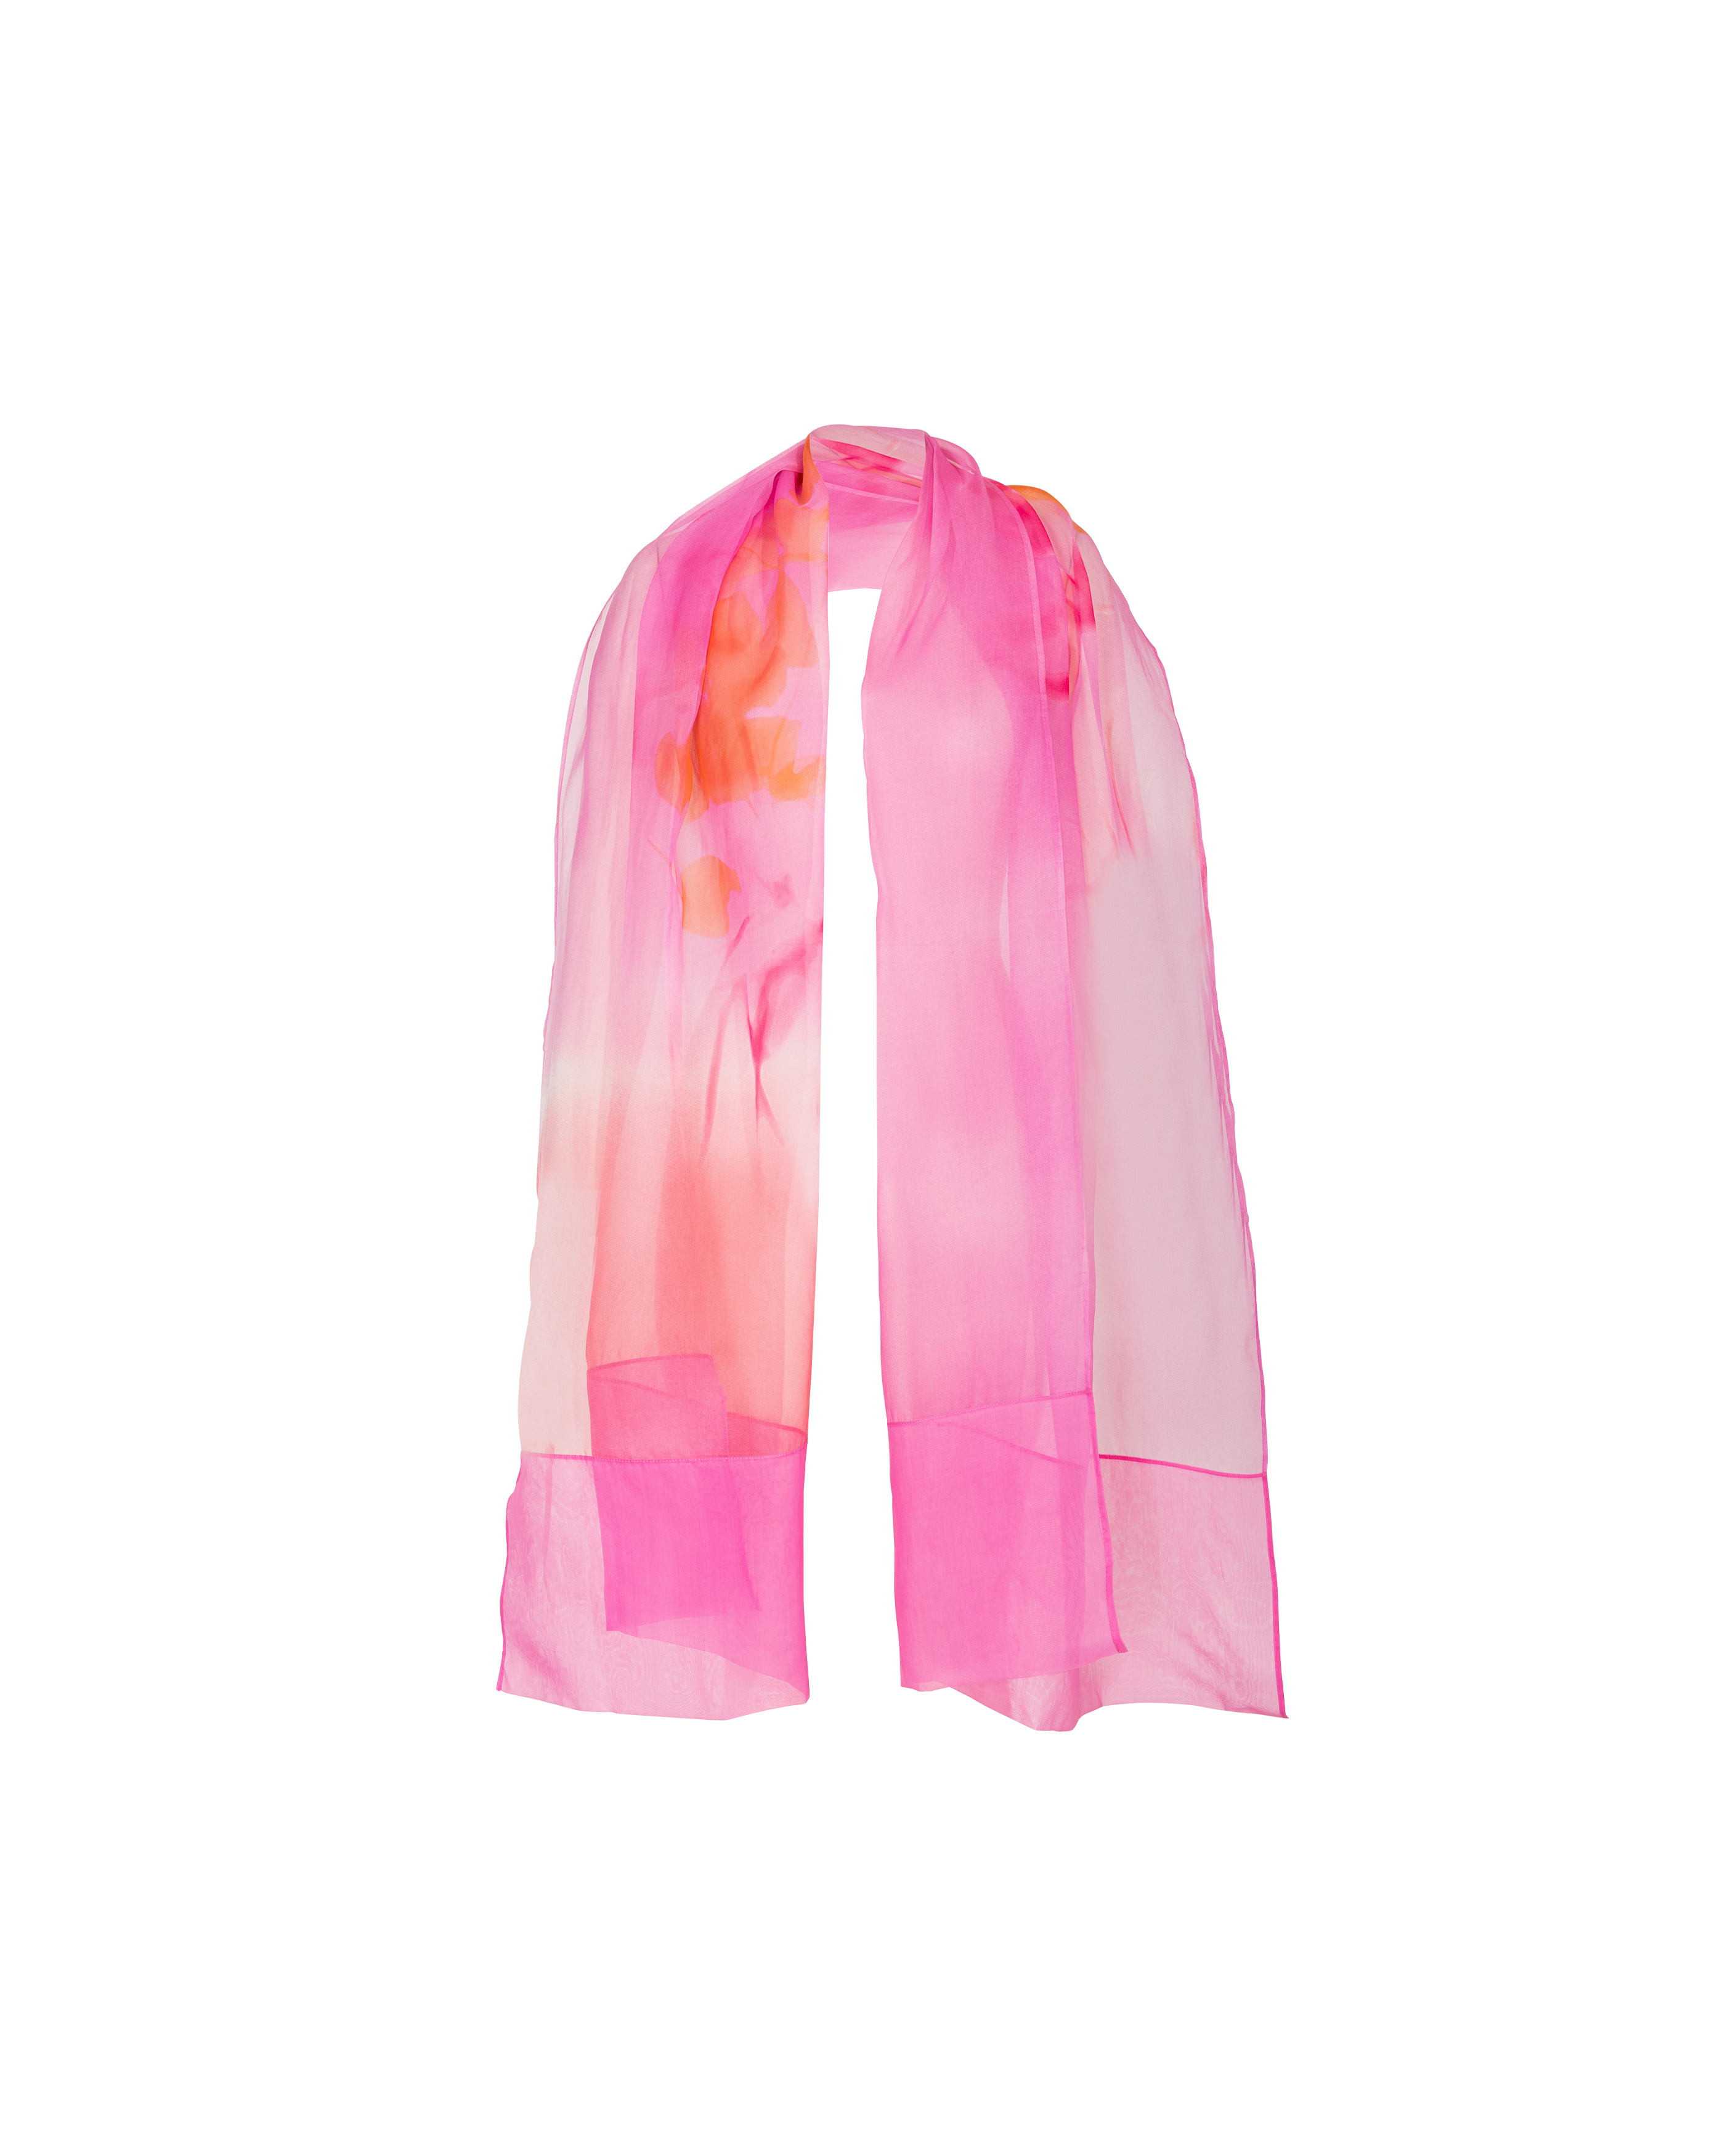 S/S 1996 Pink and Orange Semi-Sheer Scarf